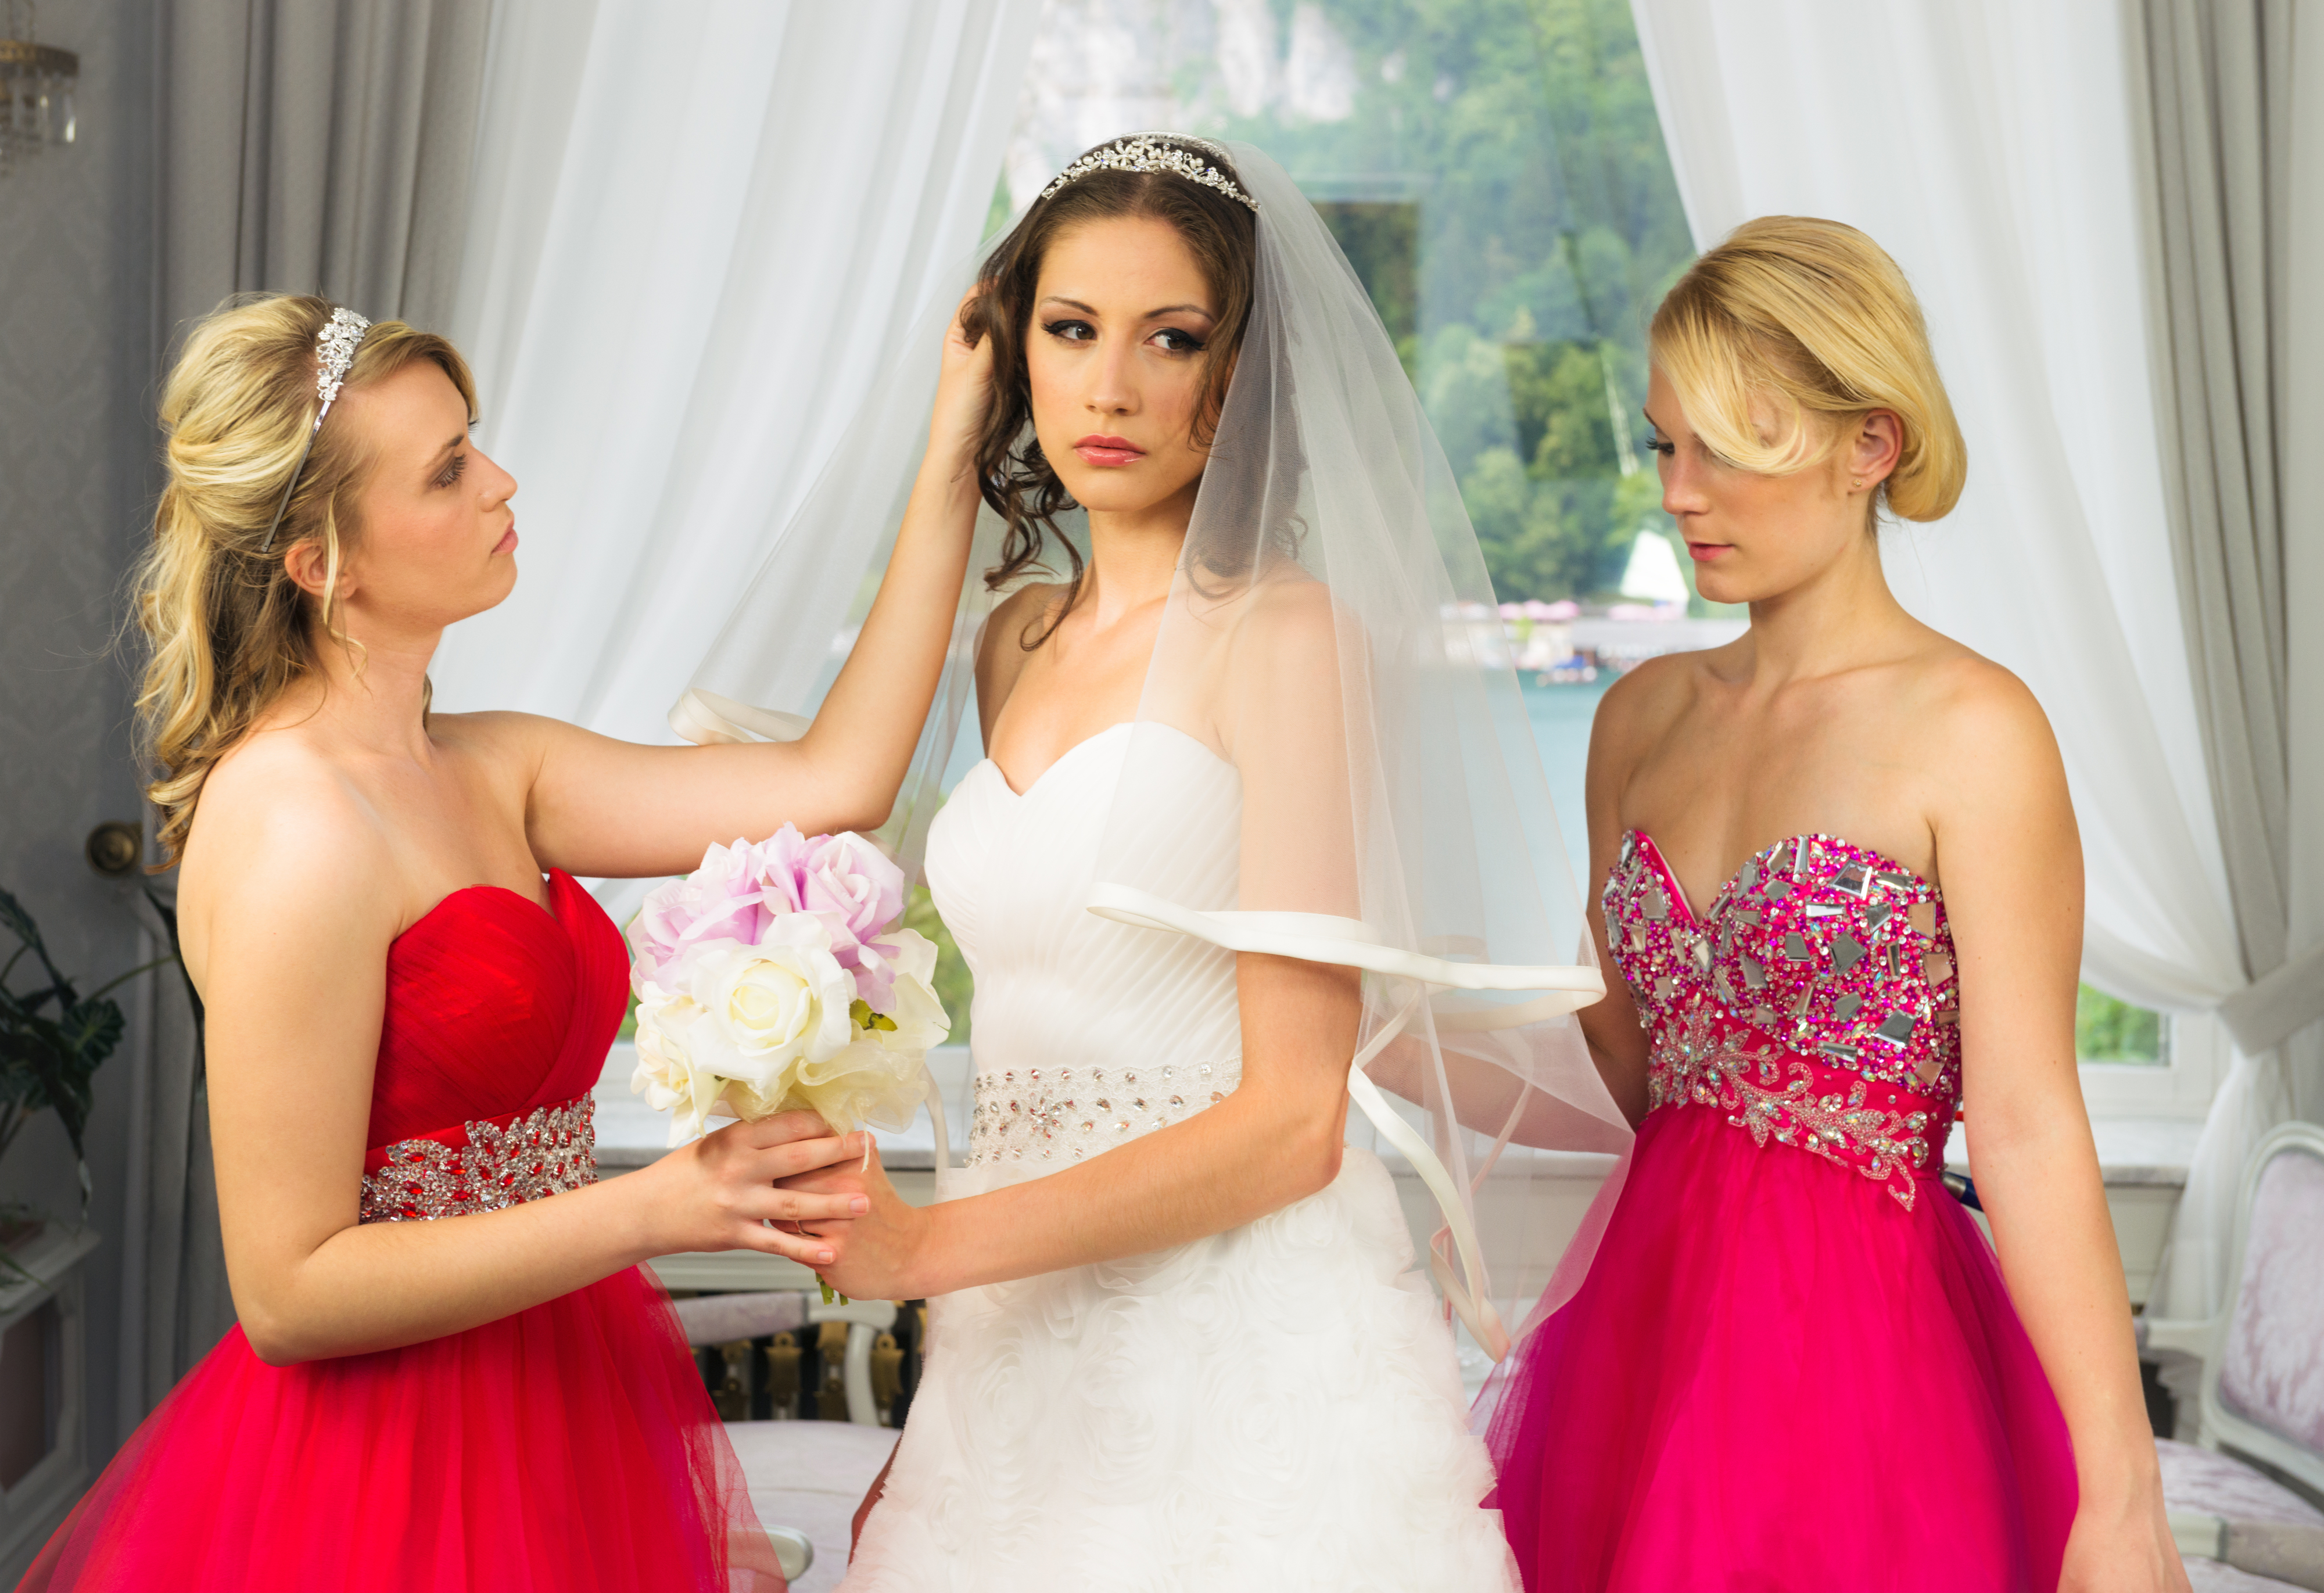 two bridesmaids helping a bride who looks visibly upset